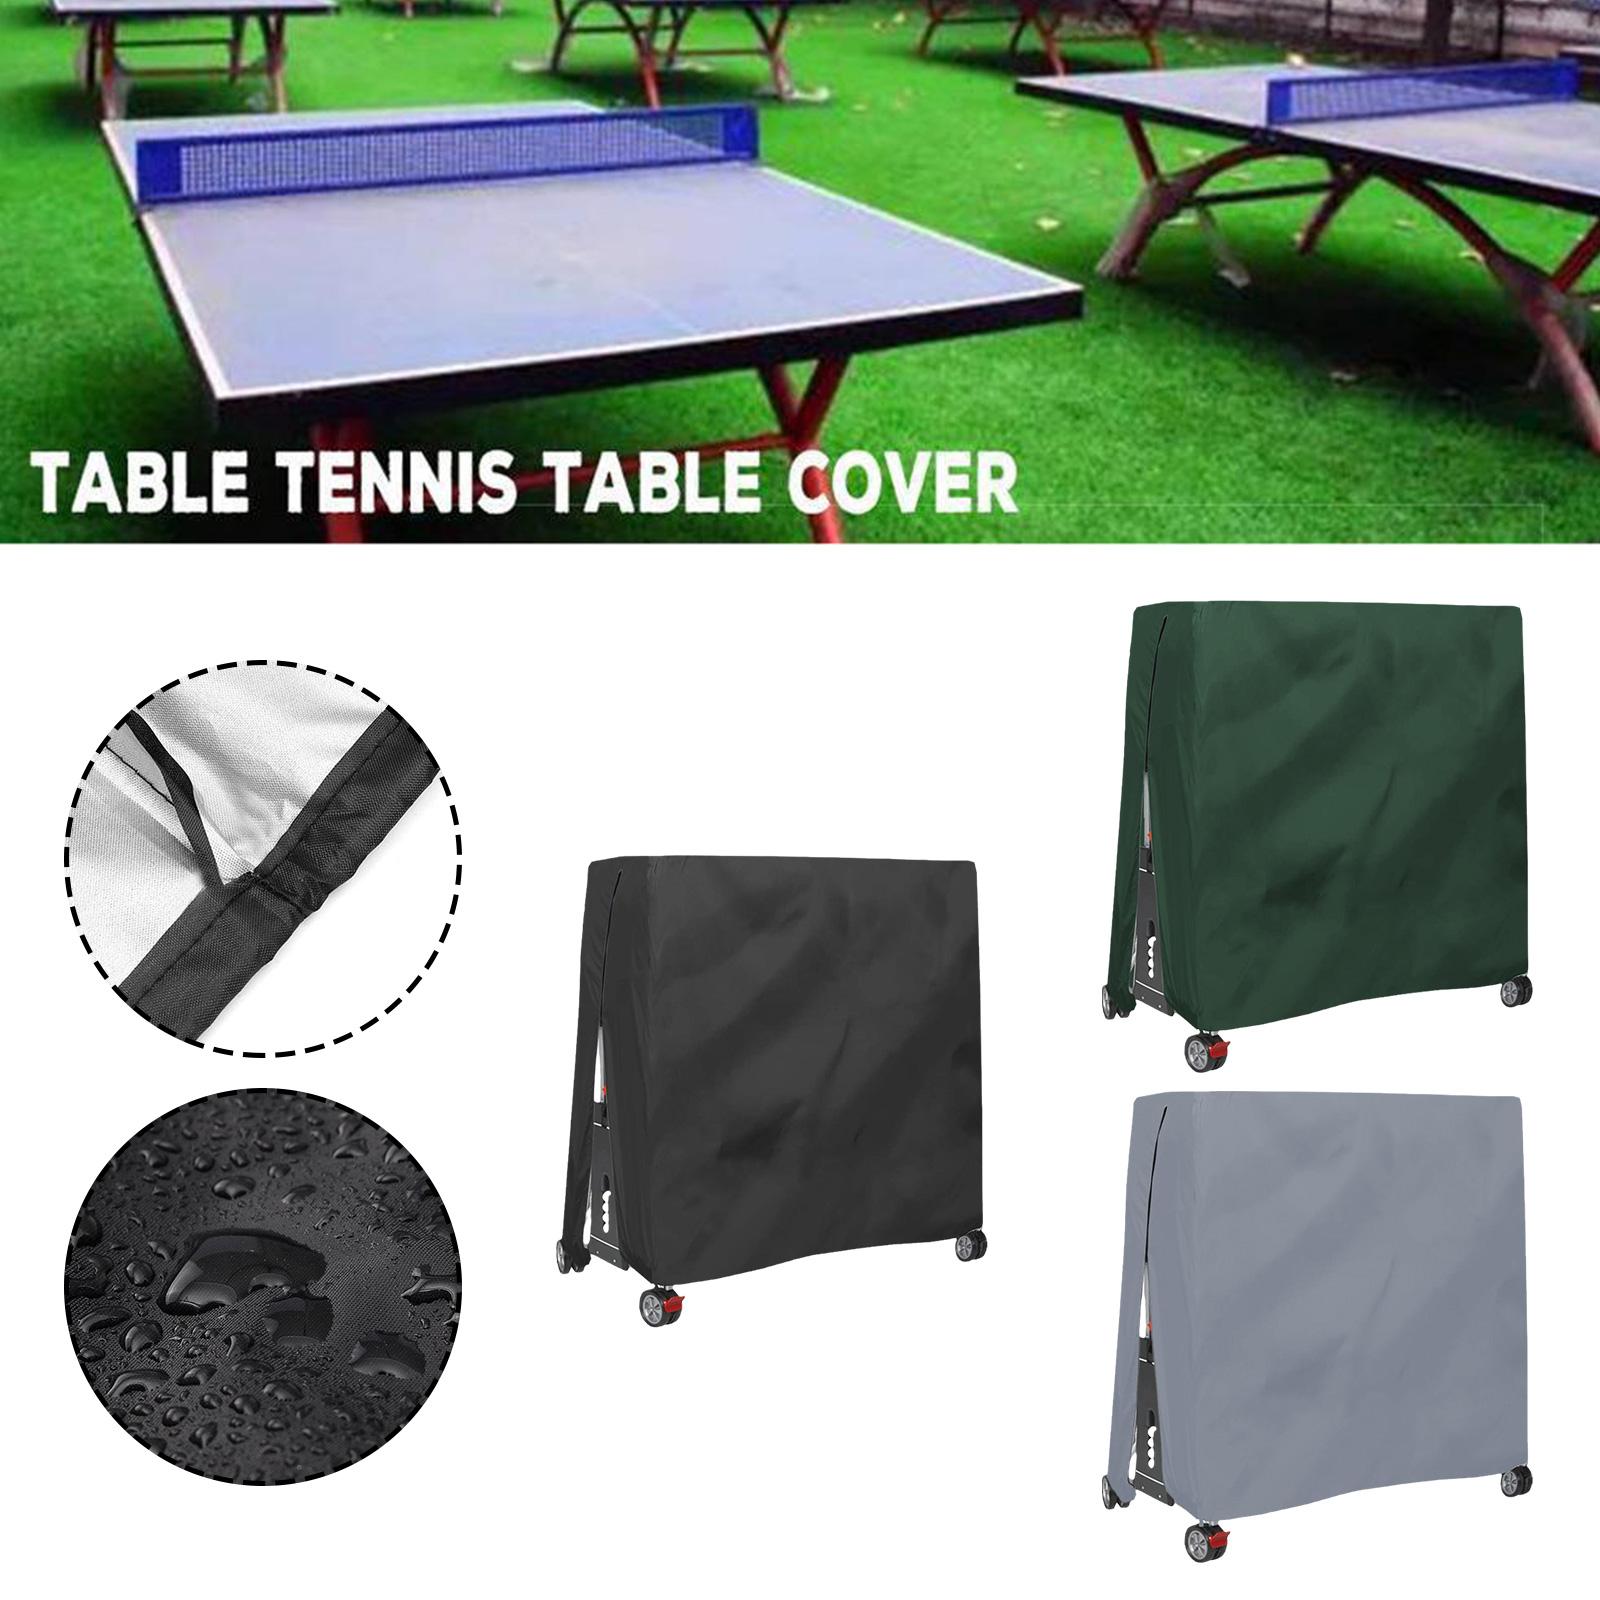 Jetcloud Table Tennis Table Cover Waterproof Breathable 210D Oxford Cloth Ping Pong Table Cover with Adjustable Straps Indoor Outdoor Protective Cover,165x 70x 185cm 